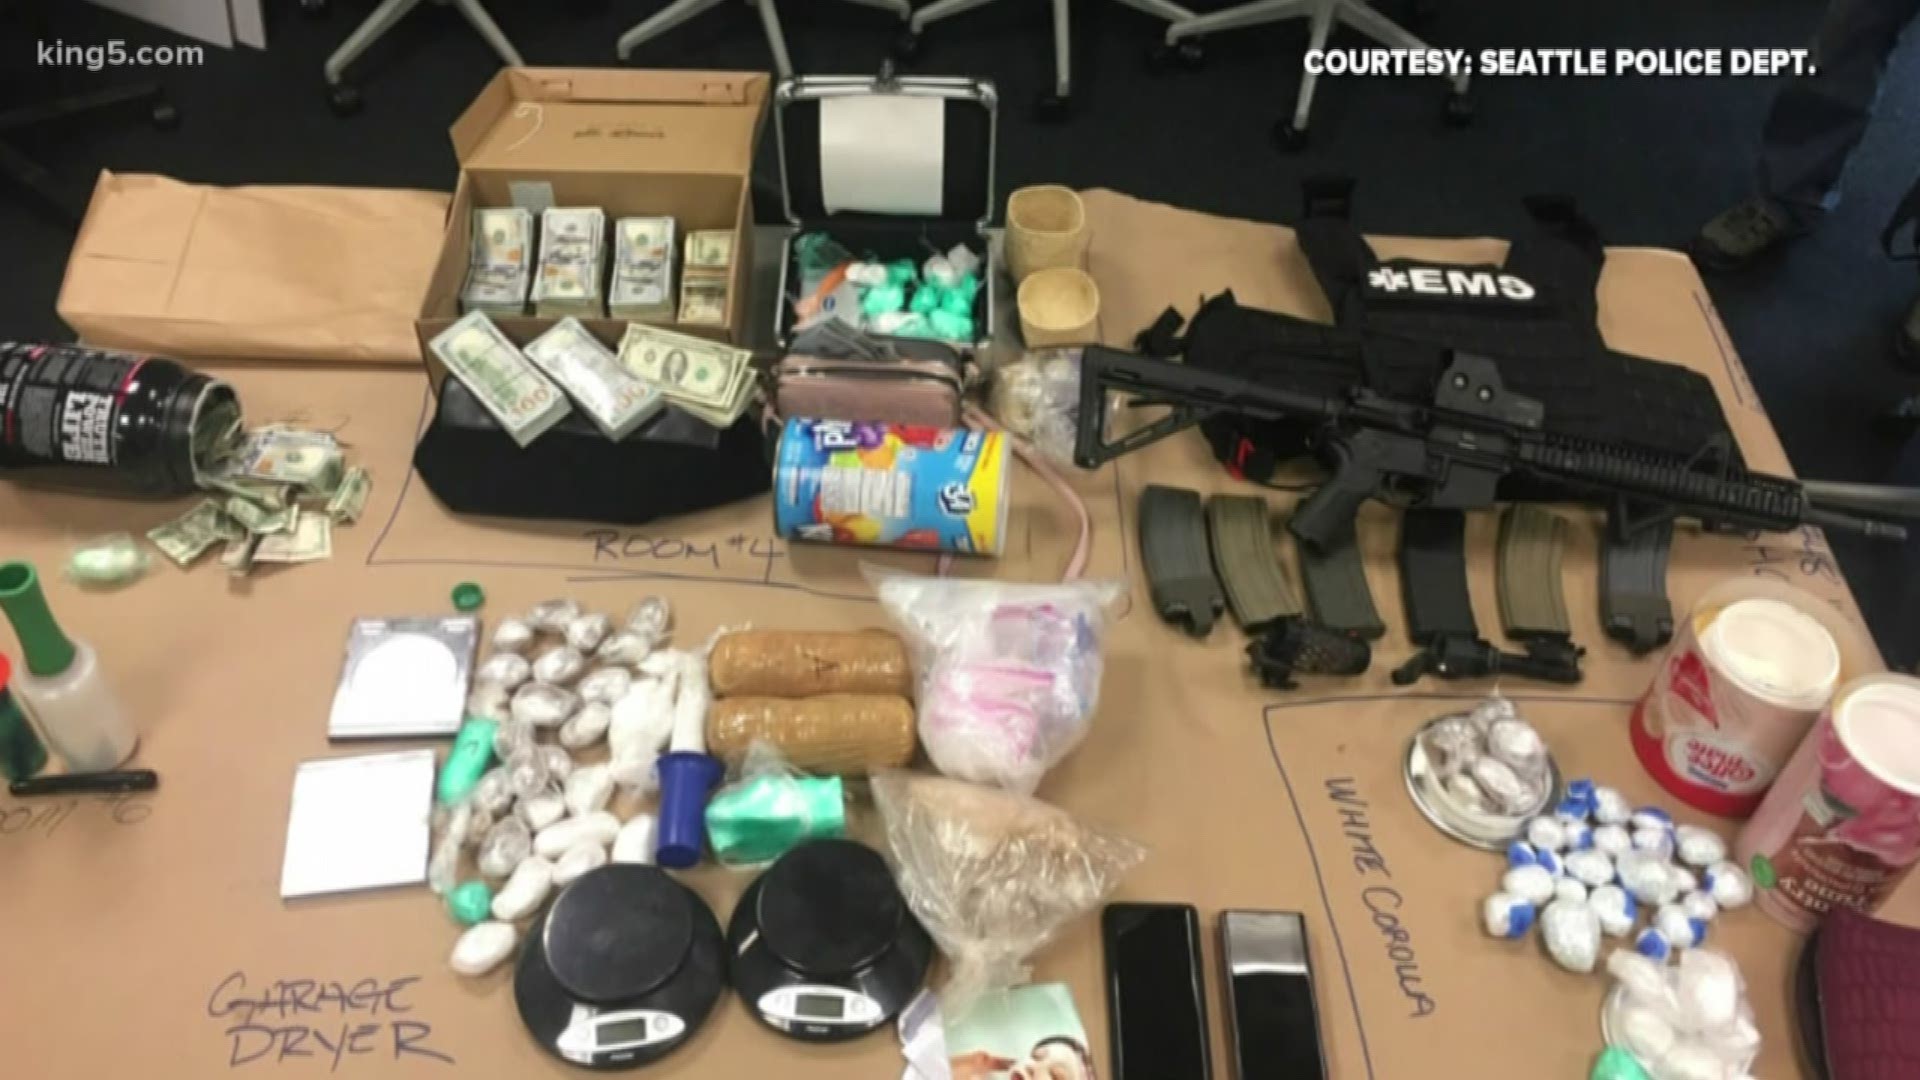 Seattle police seized significant narcotics, weapons, and $113,000 in cash on Thursday, breaking up a major drug trafficking ring that supplied dealers in North Seattle and Shoreline.